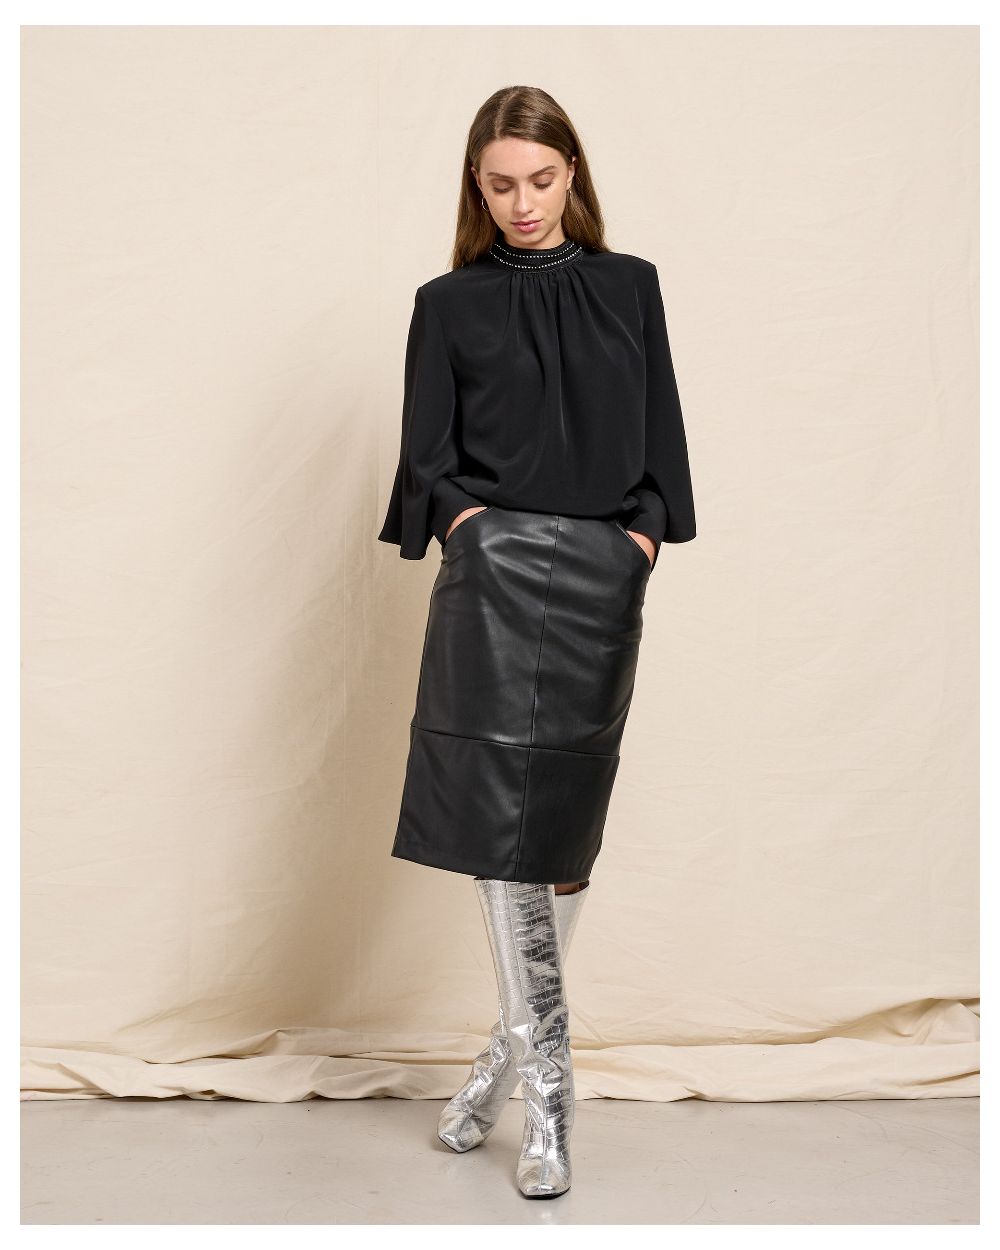 SKIRT ECO LEATHER PENCIL